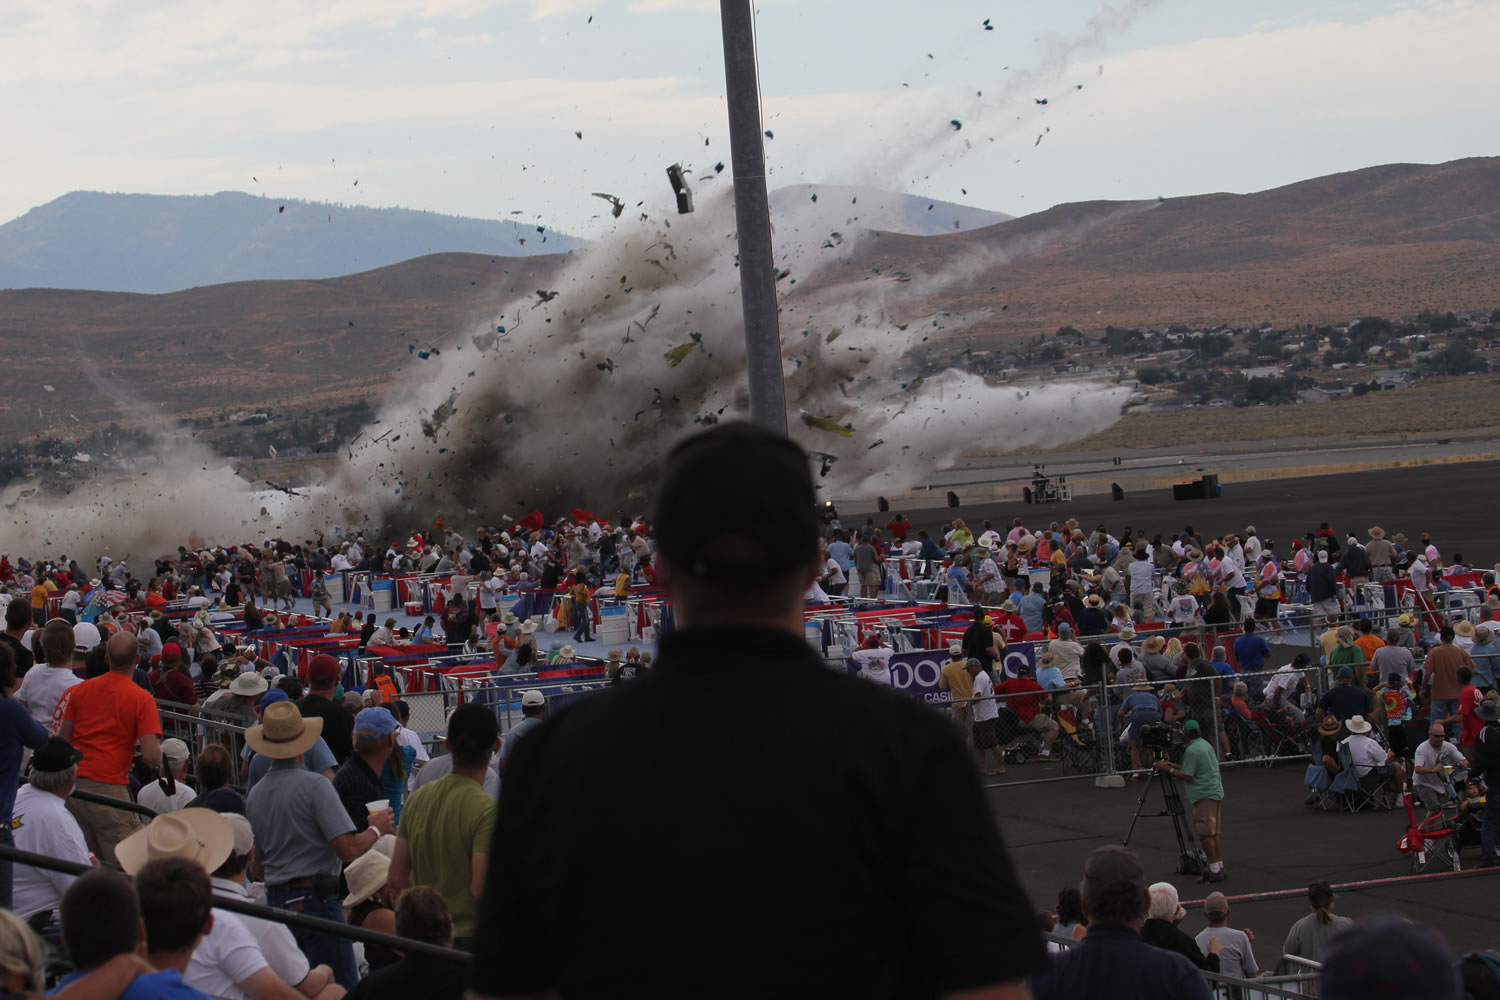 A World War II-era P-51 Mustang airplane crashes into the edge of the grandstands Friday at the Reno Air Races in Reno, Nevada.